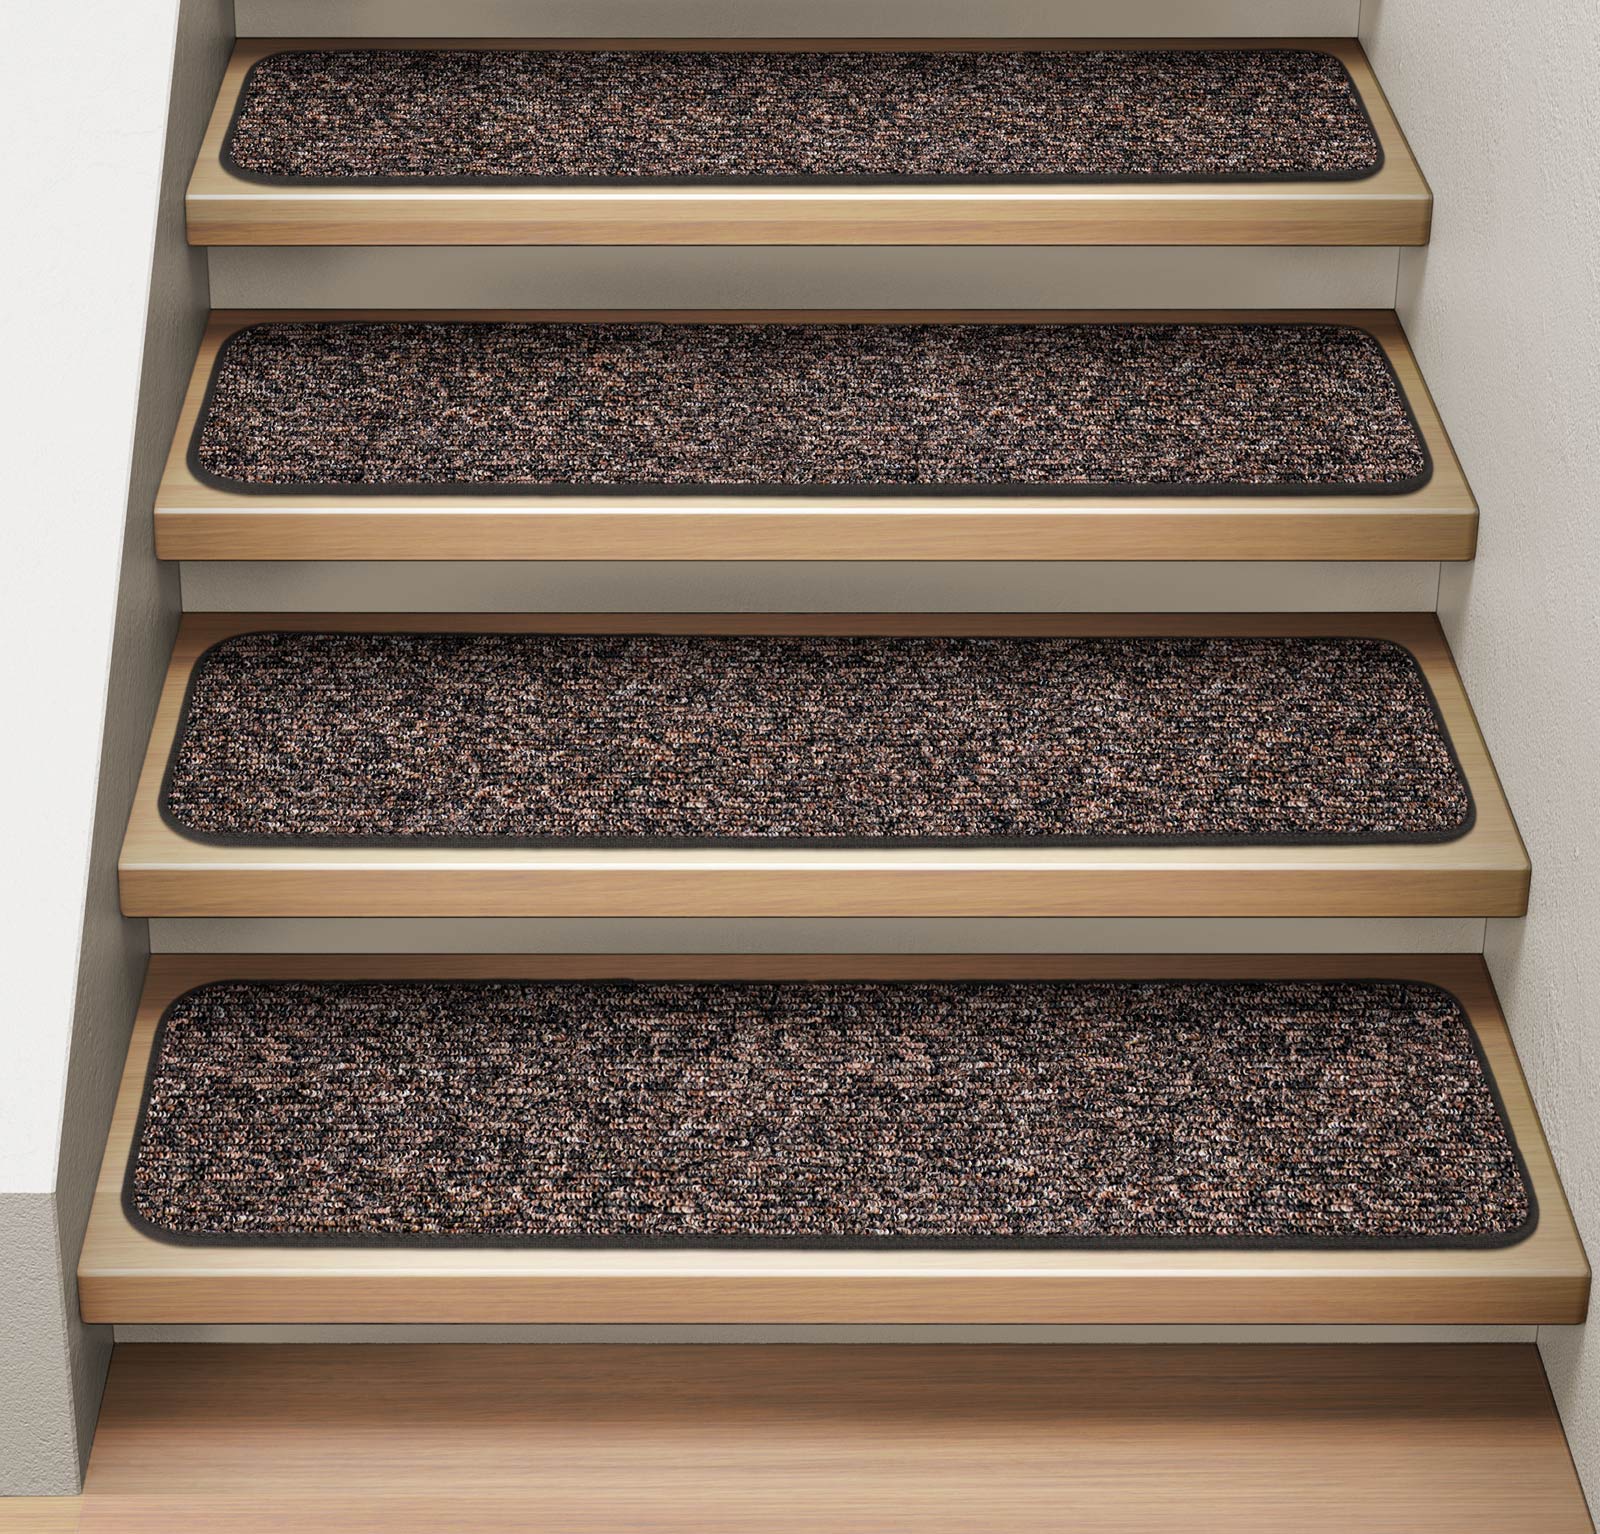 House, Home and More Set of 15 Attachable Indoor Carpet Stair Treads - Pebble Gray - 8 In. X 27 In.